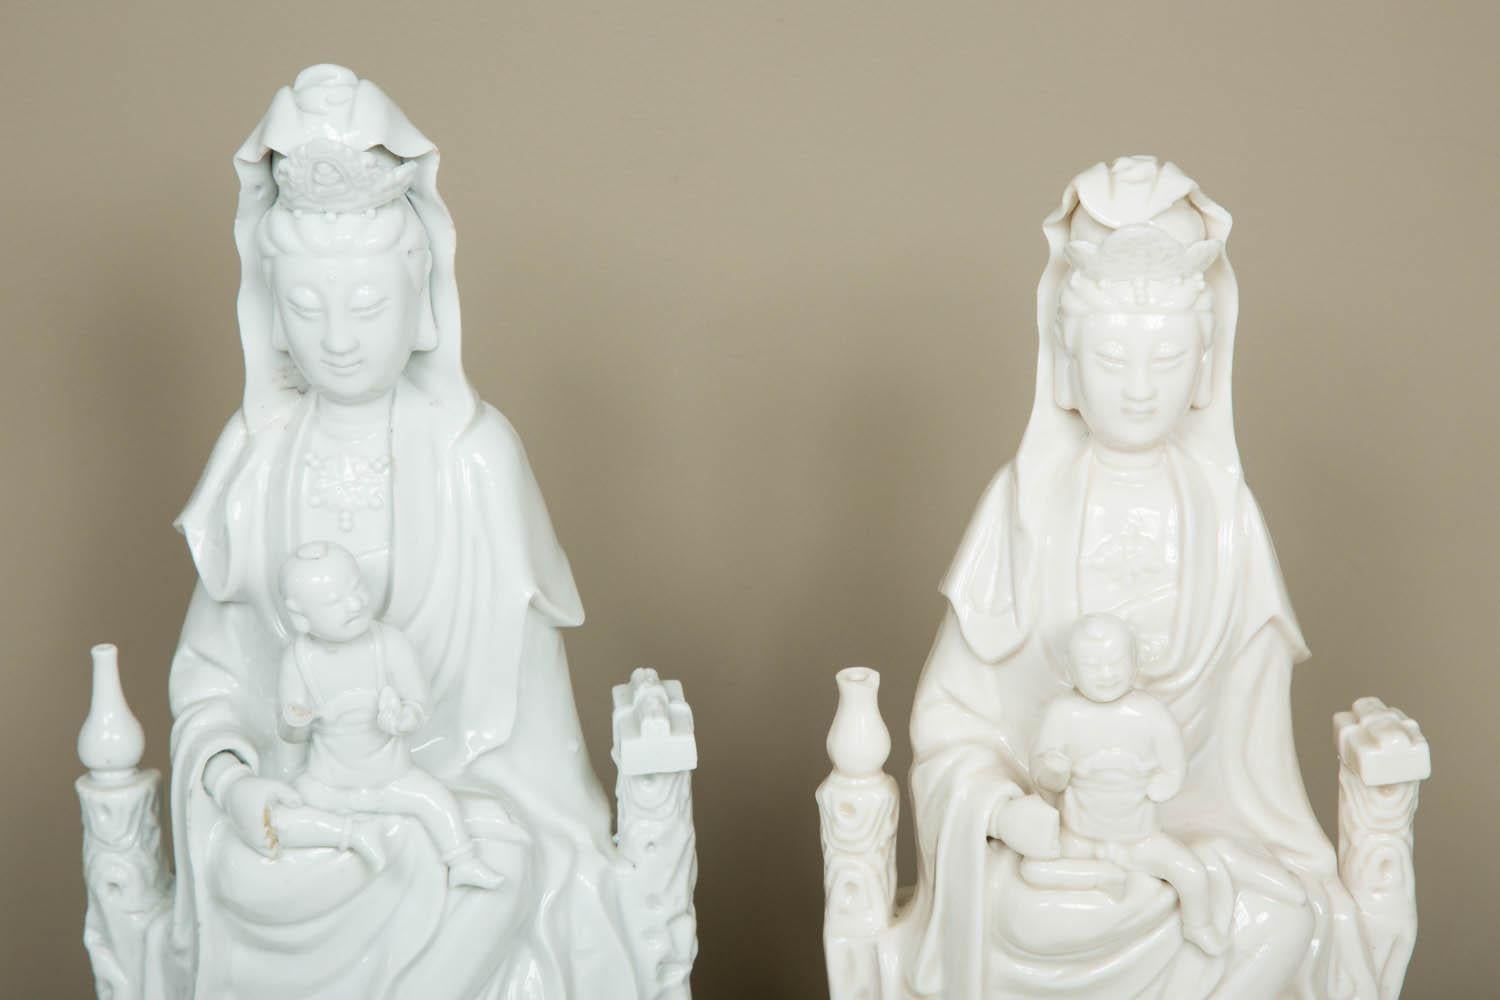 A Kangxi period (1662-1722) matched pair of Blanc de Chine porcelain model of seated Guanyin in the most popular representation: holding a child, flanked by two children bearing offers;
from the kilns in Dehua, Fujian Province.
Condition: as per